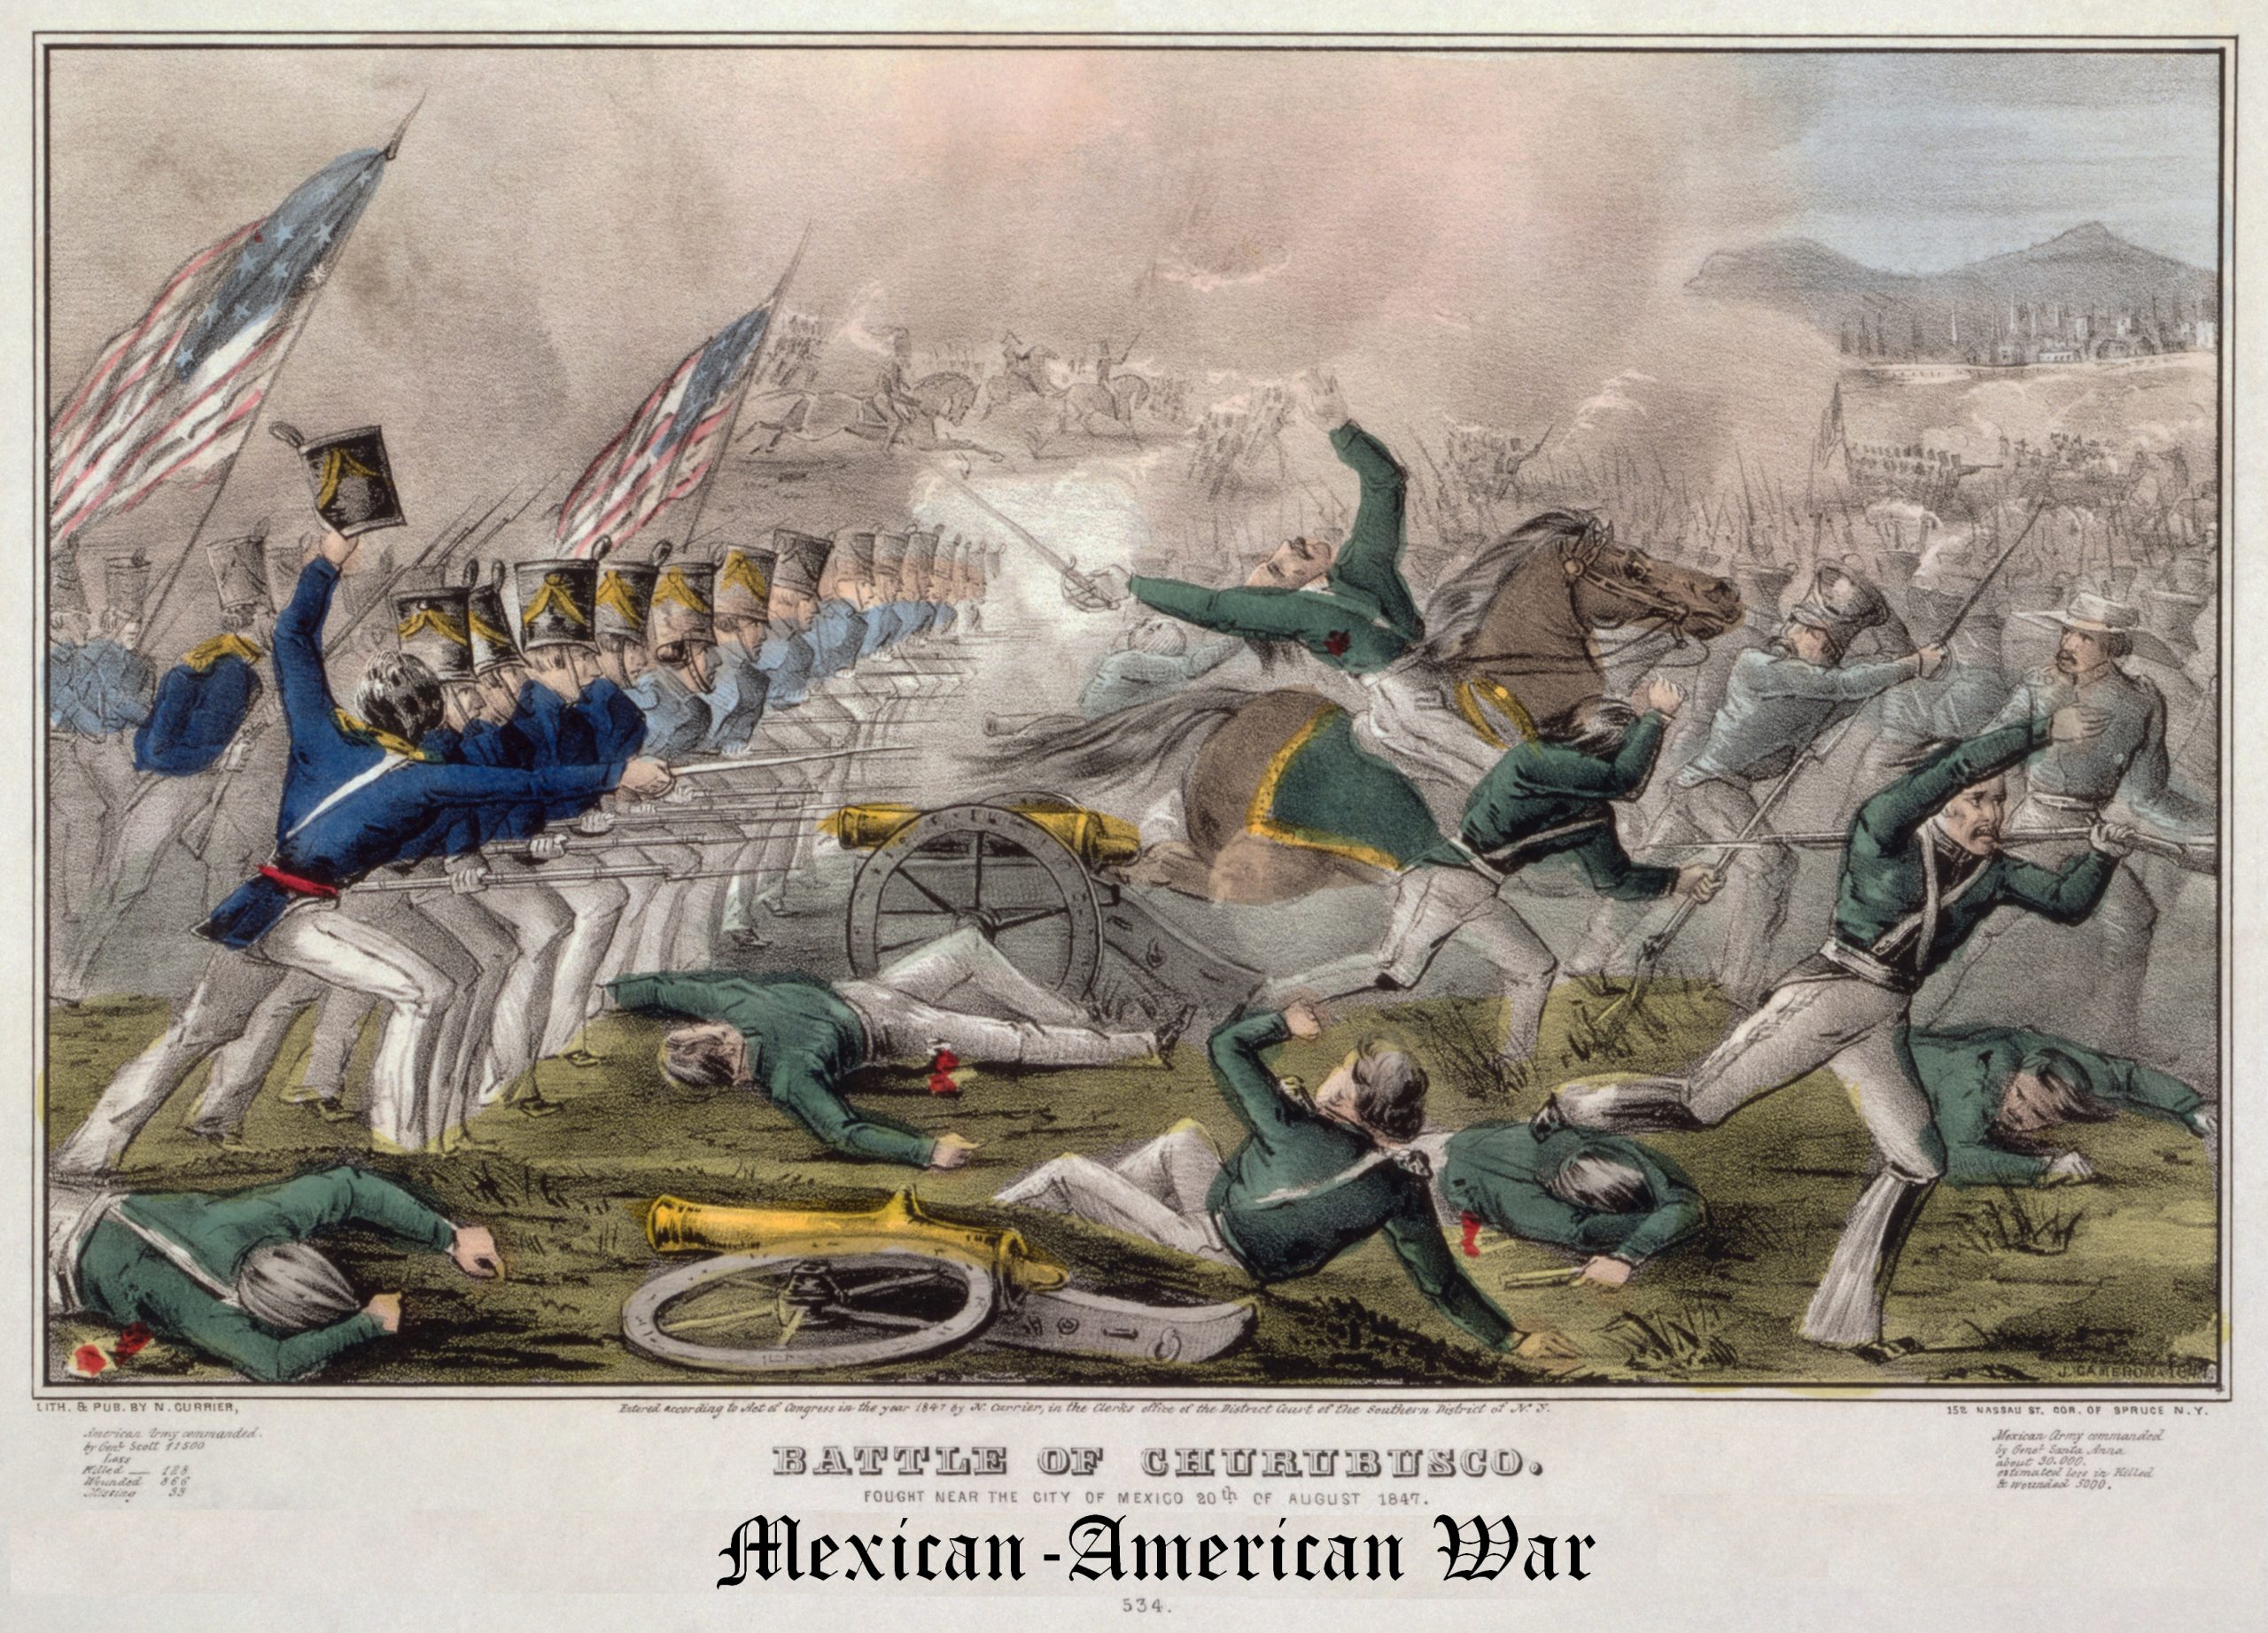 Mexican and American soldiers fight in the Battle of Churubusco during the Mexican-American War